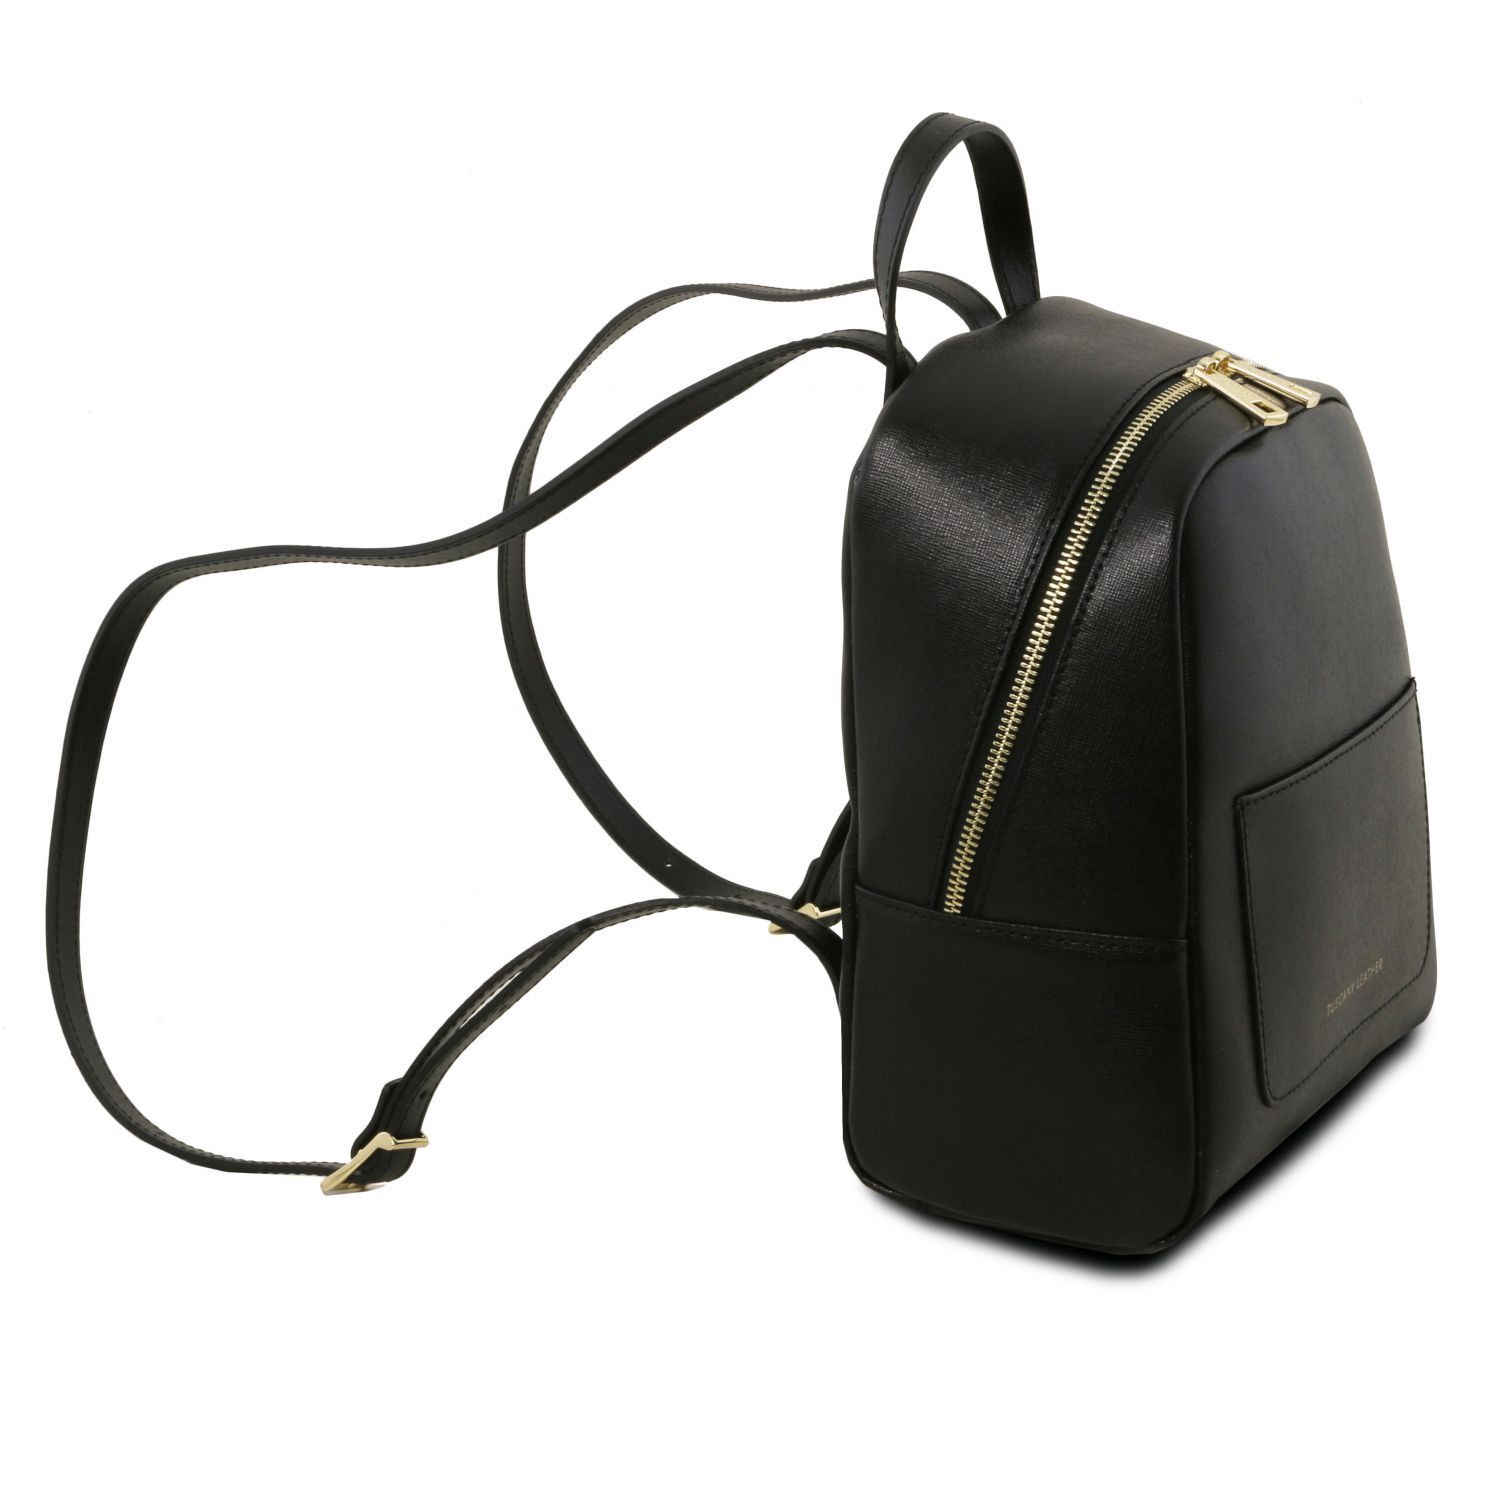 TL Bag Small Saffiano leather backpack for women 